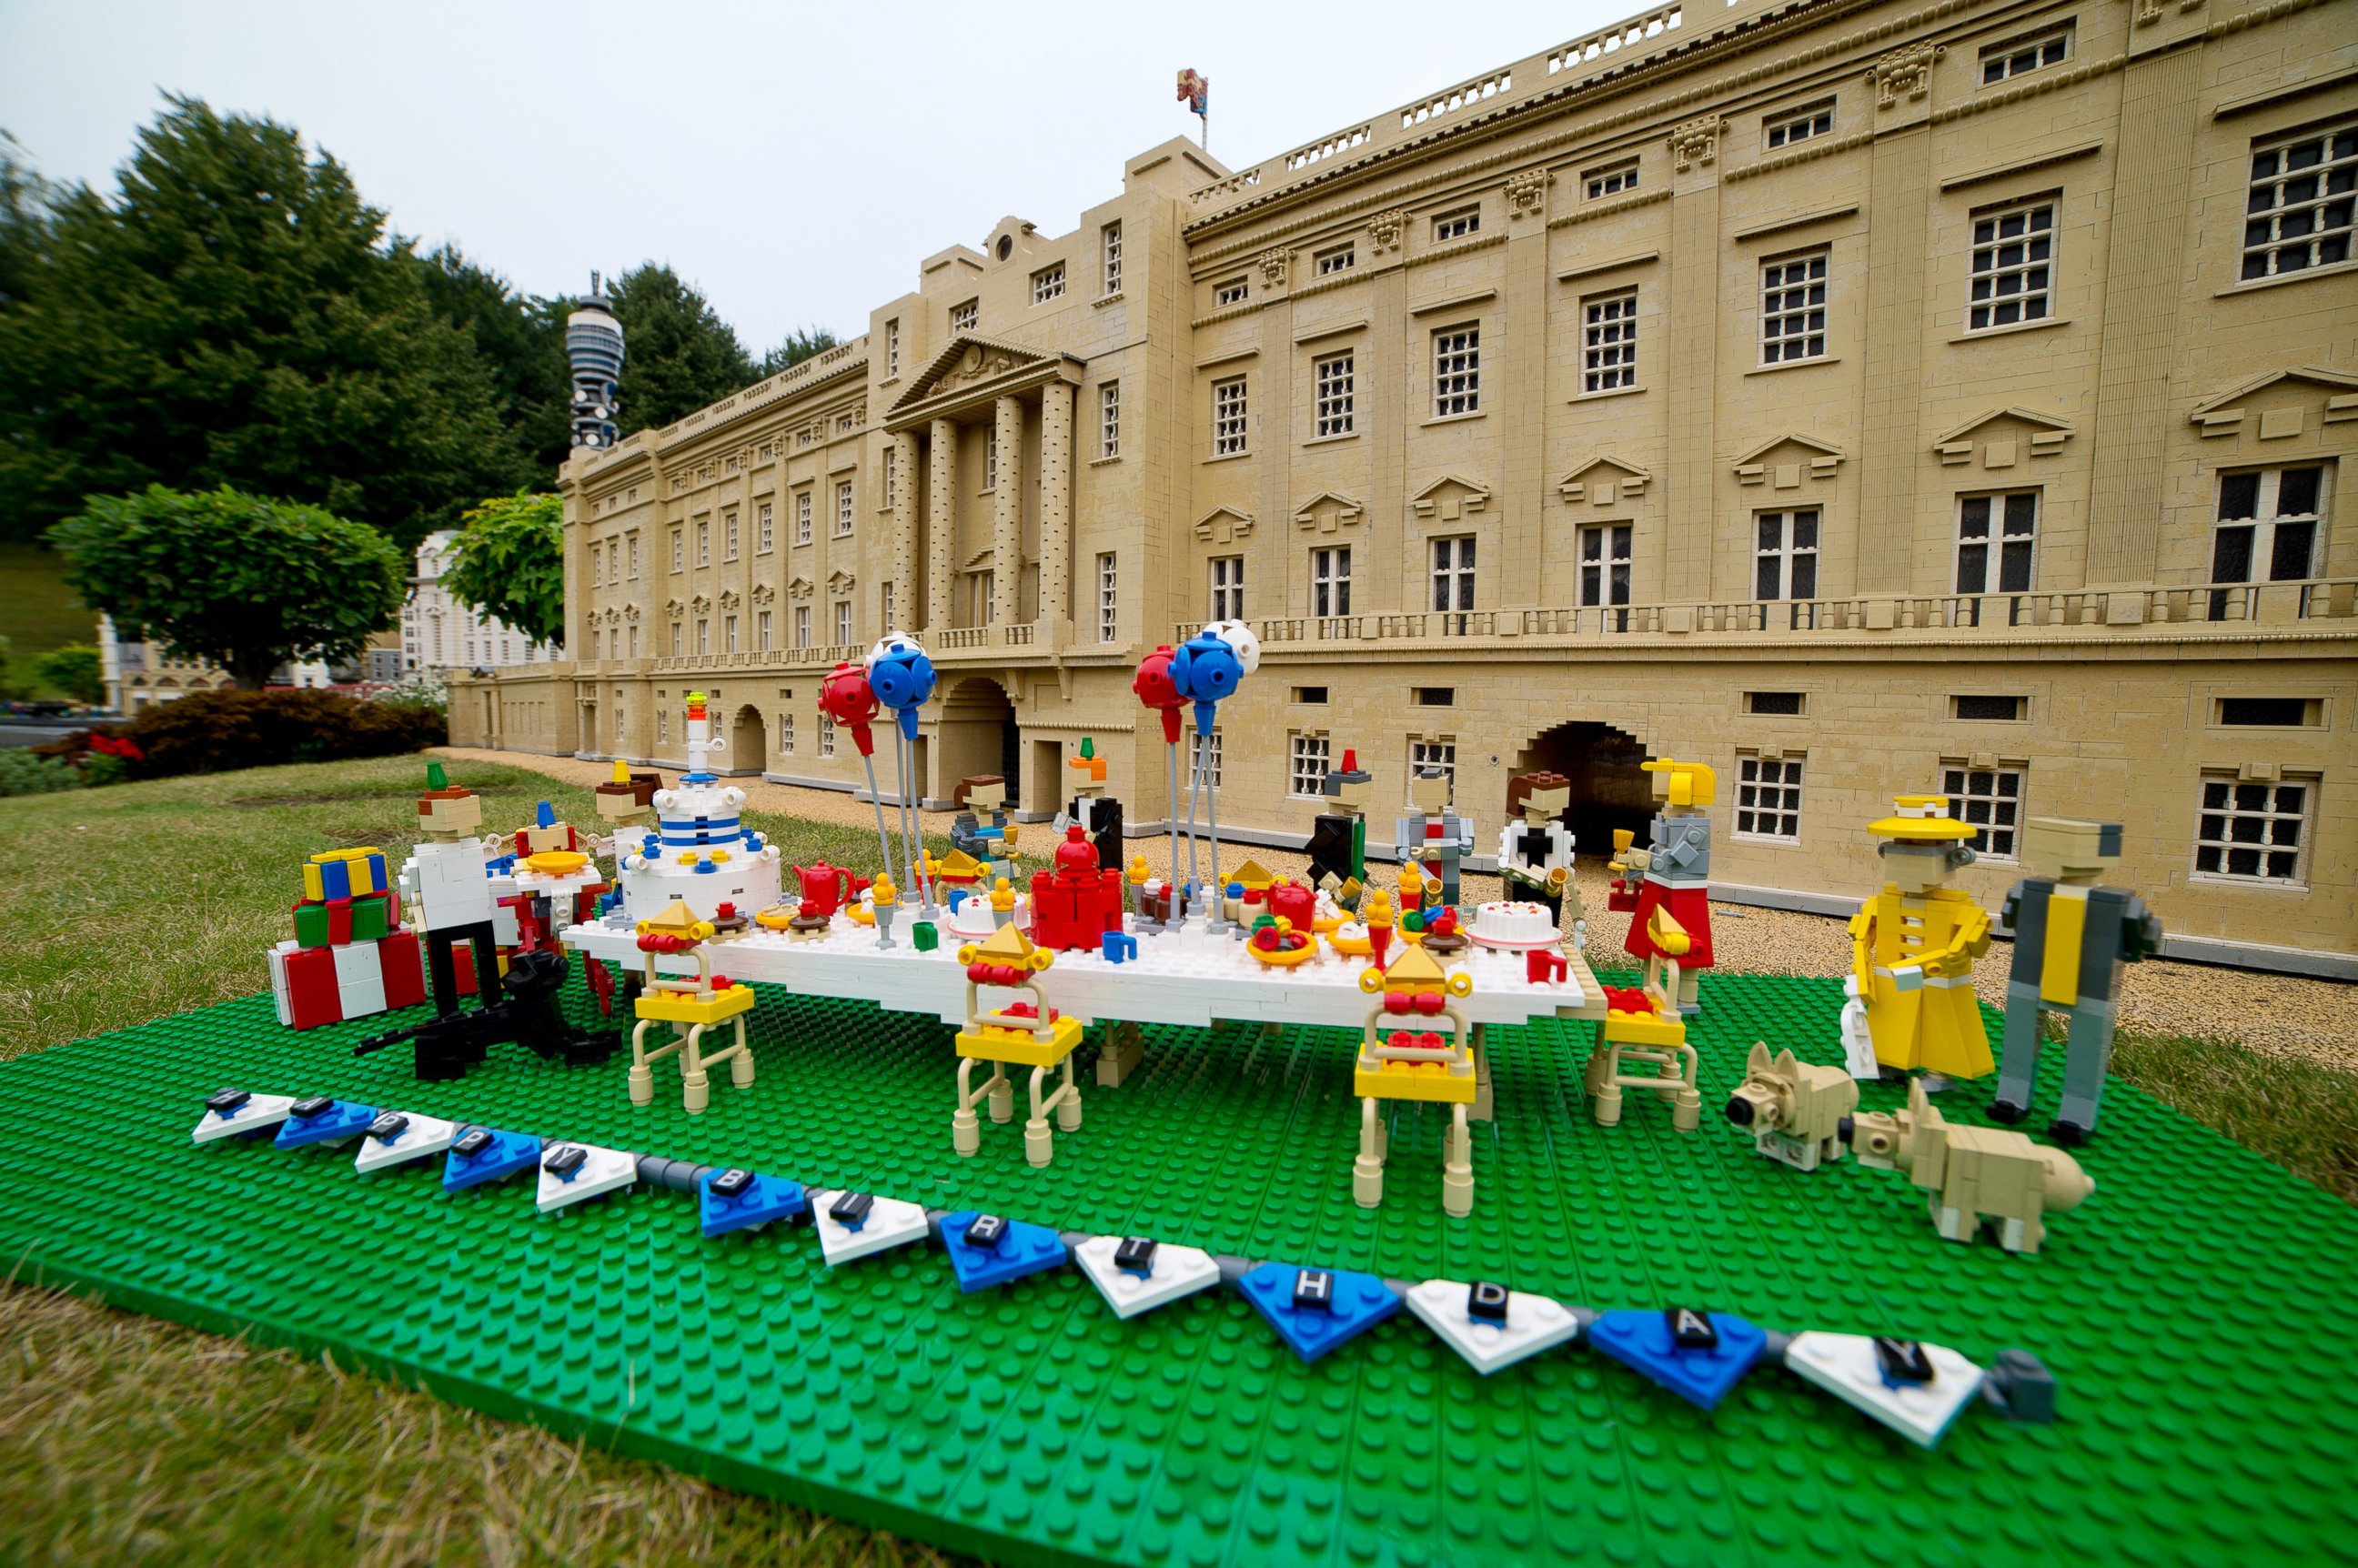 PHOTO: Legoland Windsor hosts a first birthday party for Prince George of Cambridge on July 21, 2014 in Windsor, England.